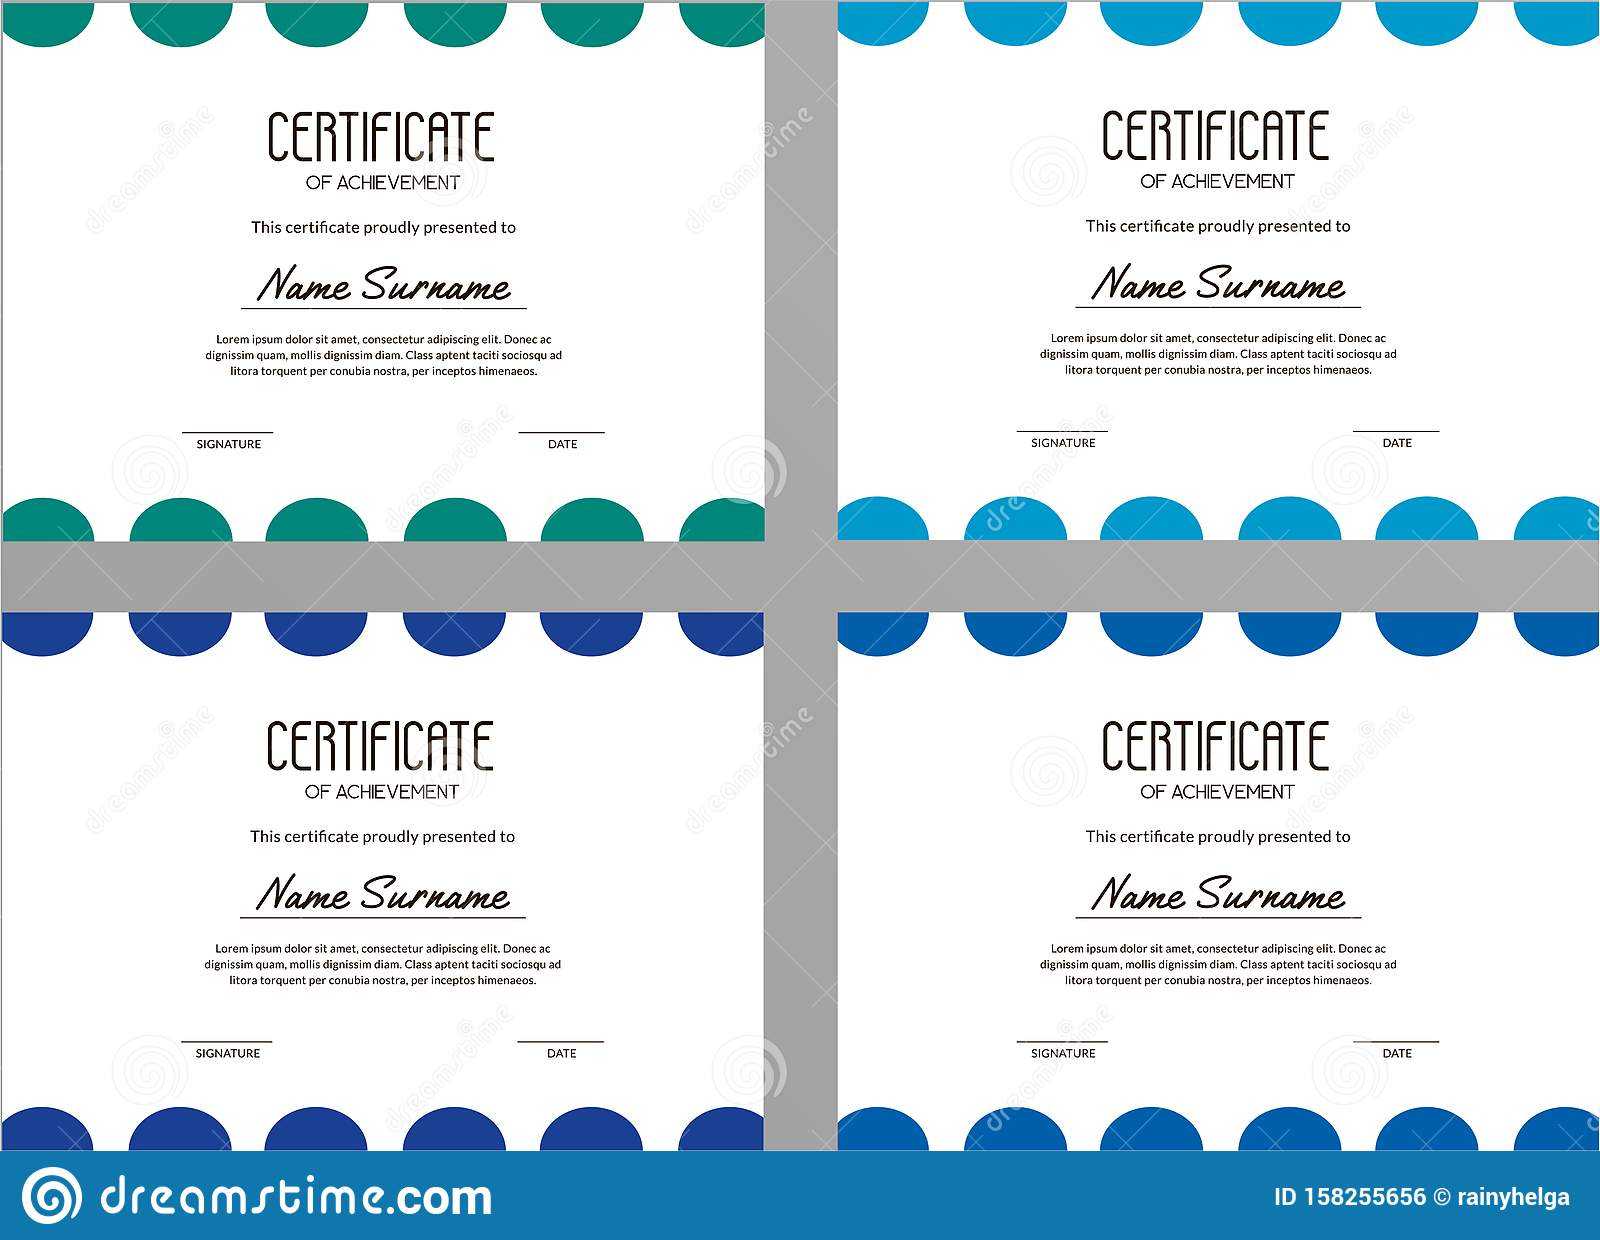 Set Of Clean Certificate Templates With Colorful Circles With Regard To Update Certificates That Use Certificate Templates